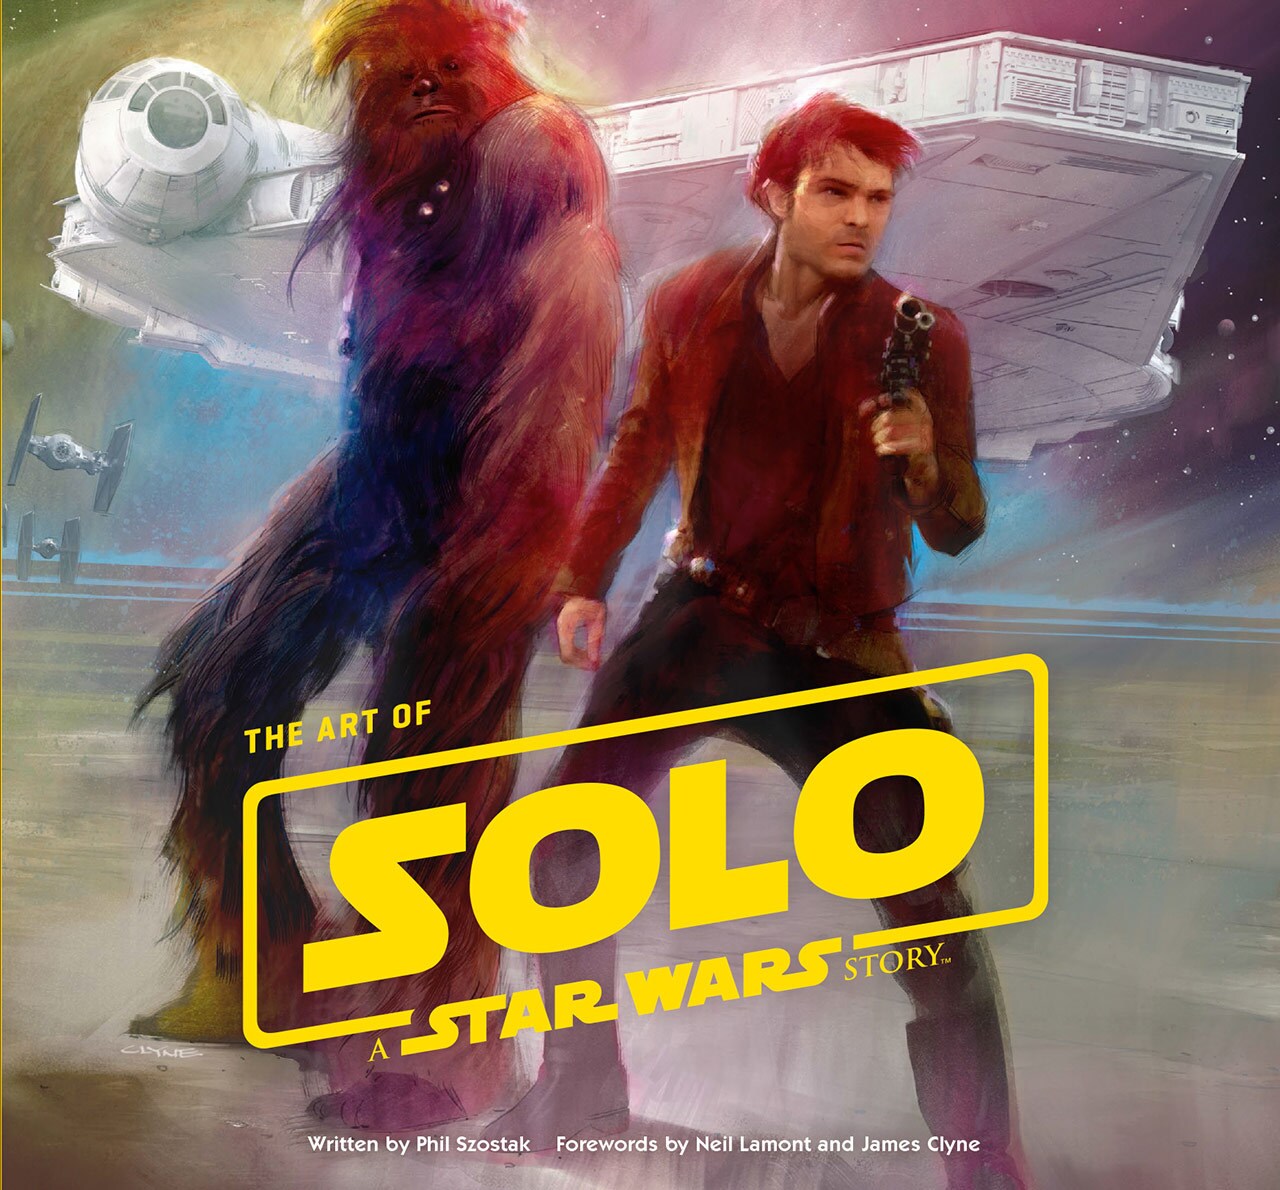 The Art of Solo: A Star Wars Story book cover. It features stylized art of Han and Chewbacca standing with the Millennium Falcon in the background.